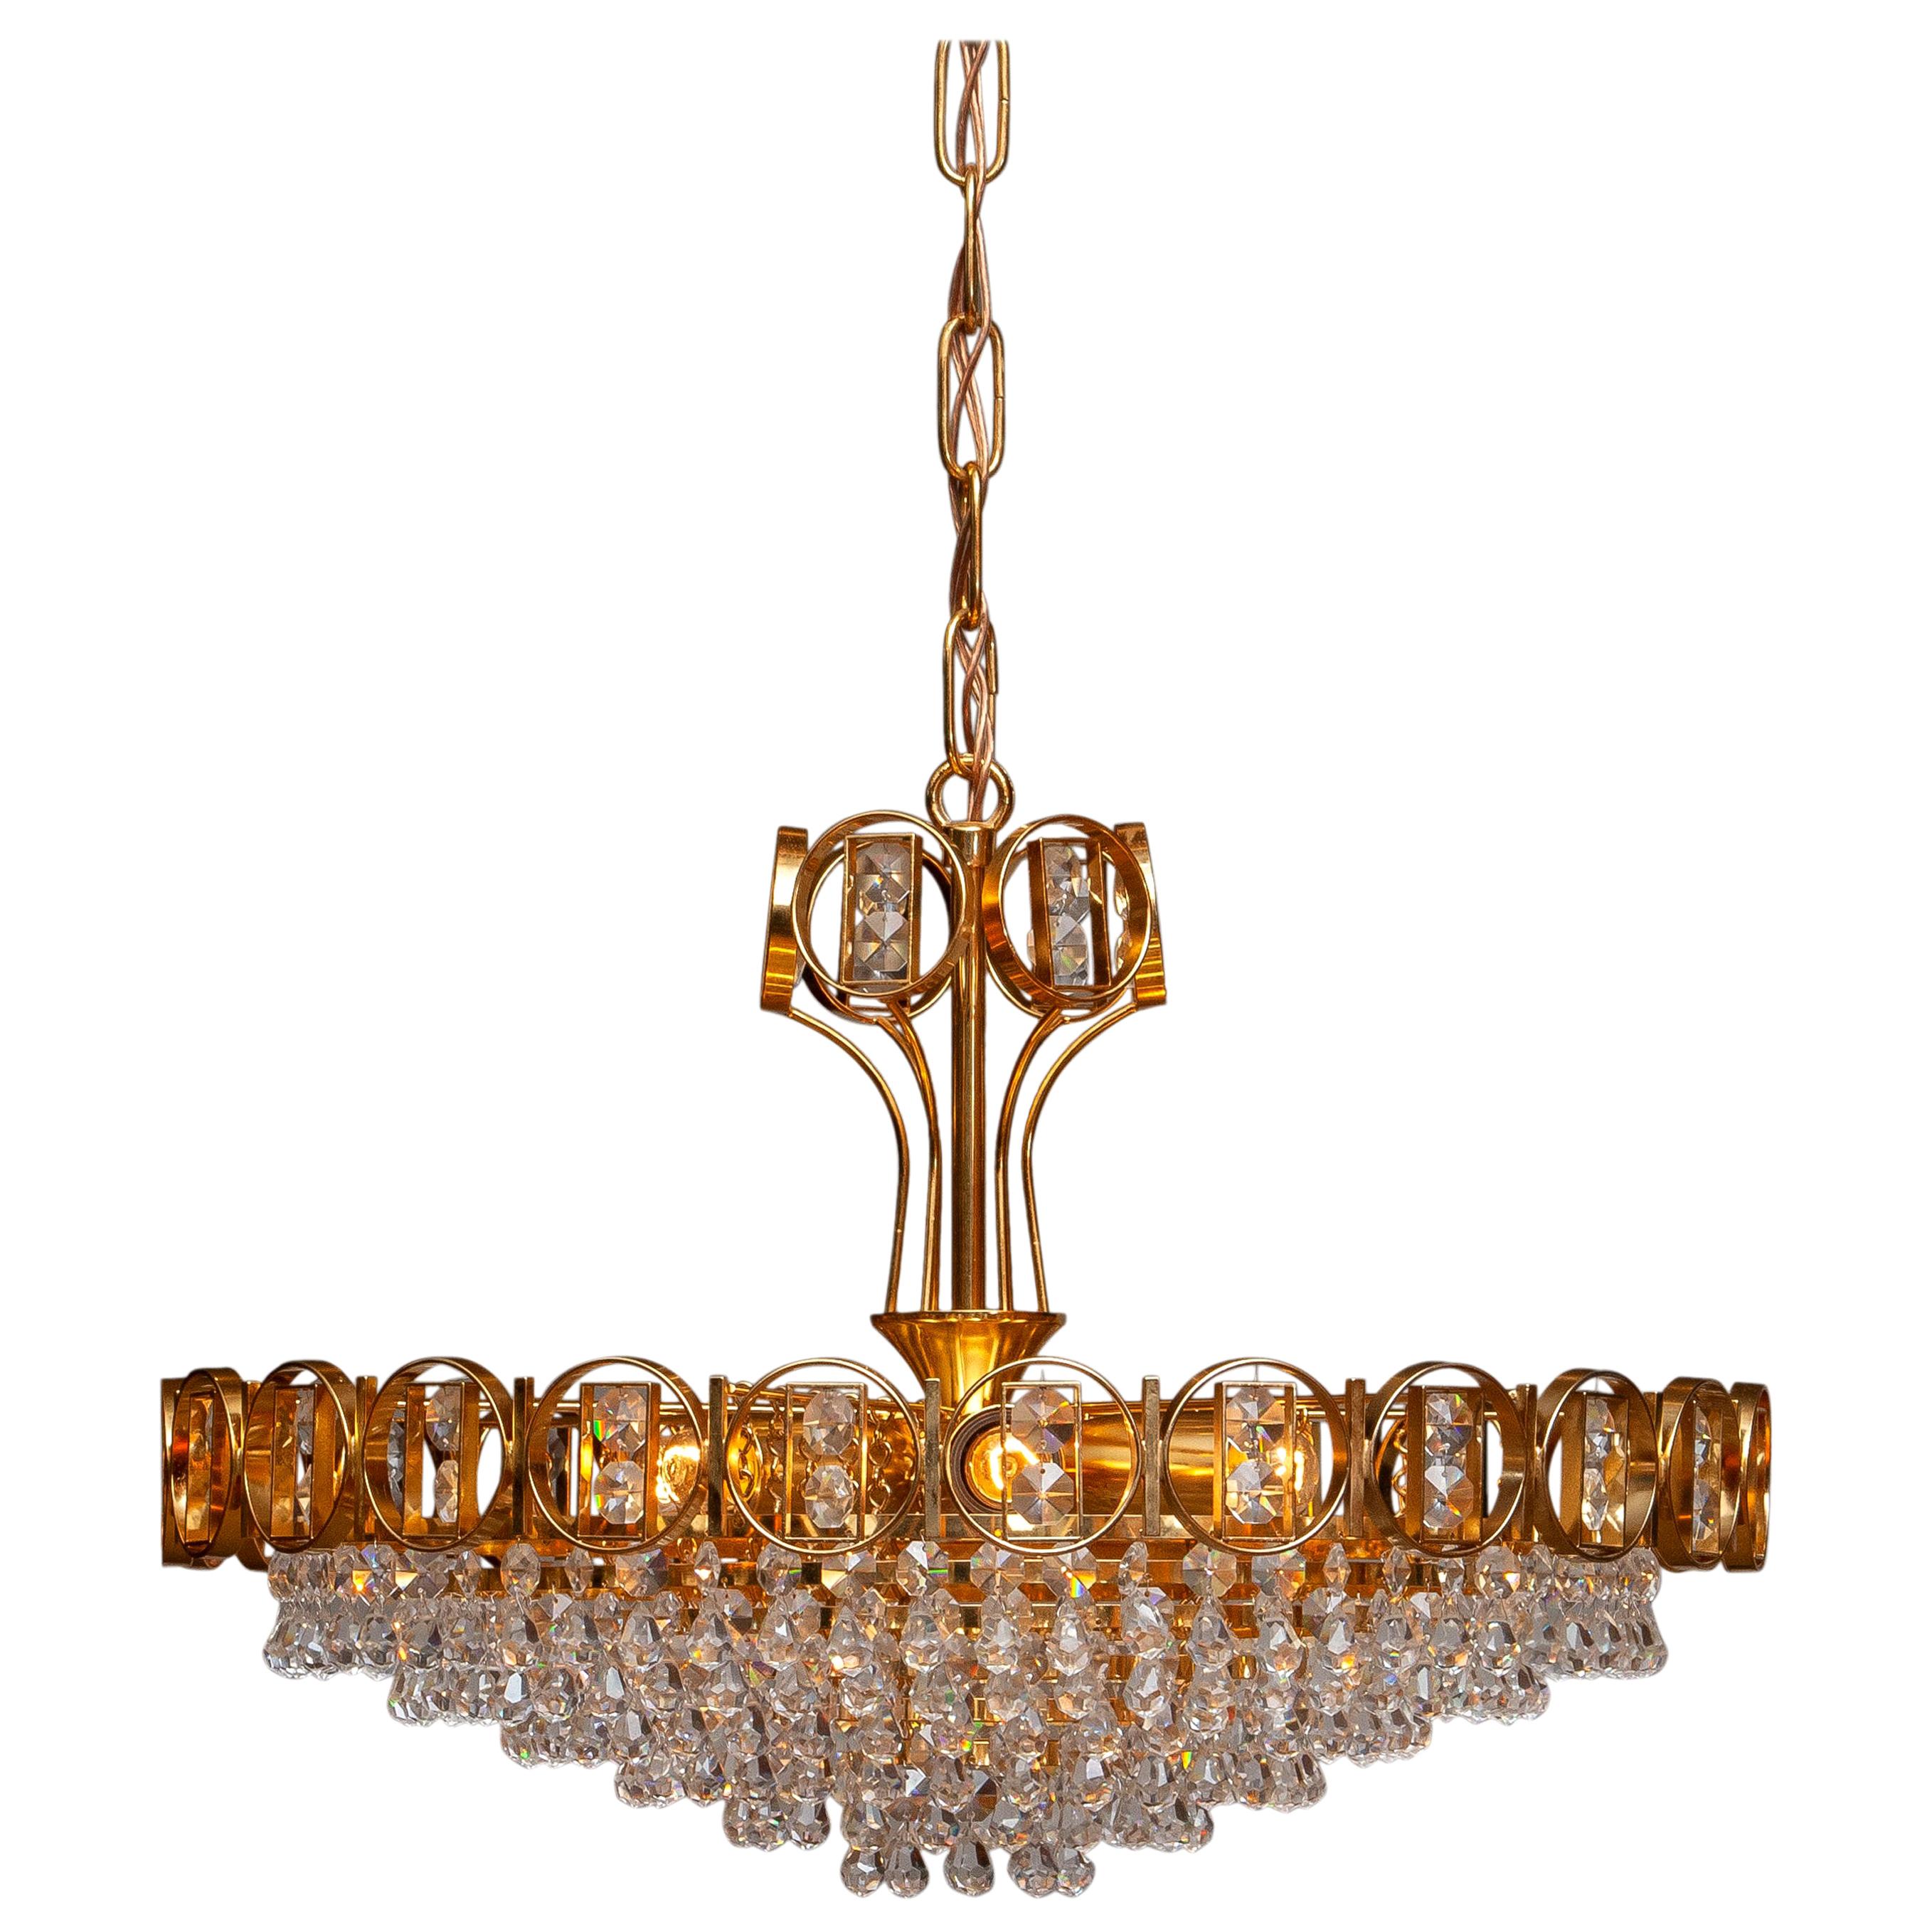 1970s, Gold-Plated Brass Chandelier with Faceted Crystals Made by Palwa, Germany